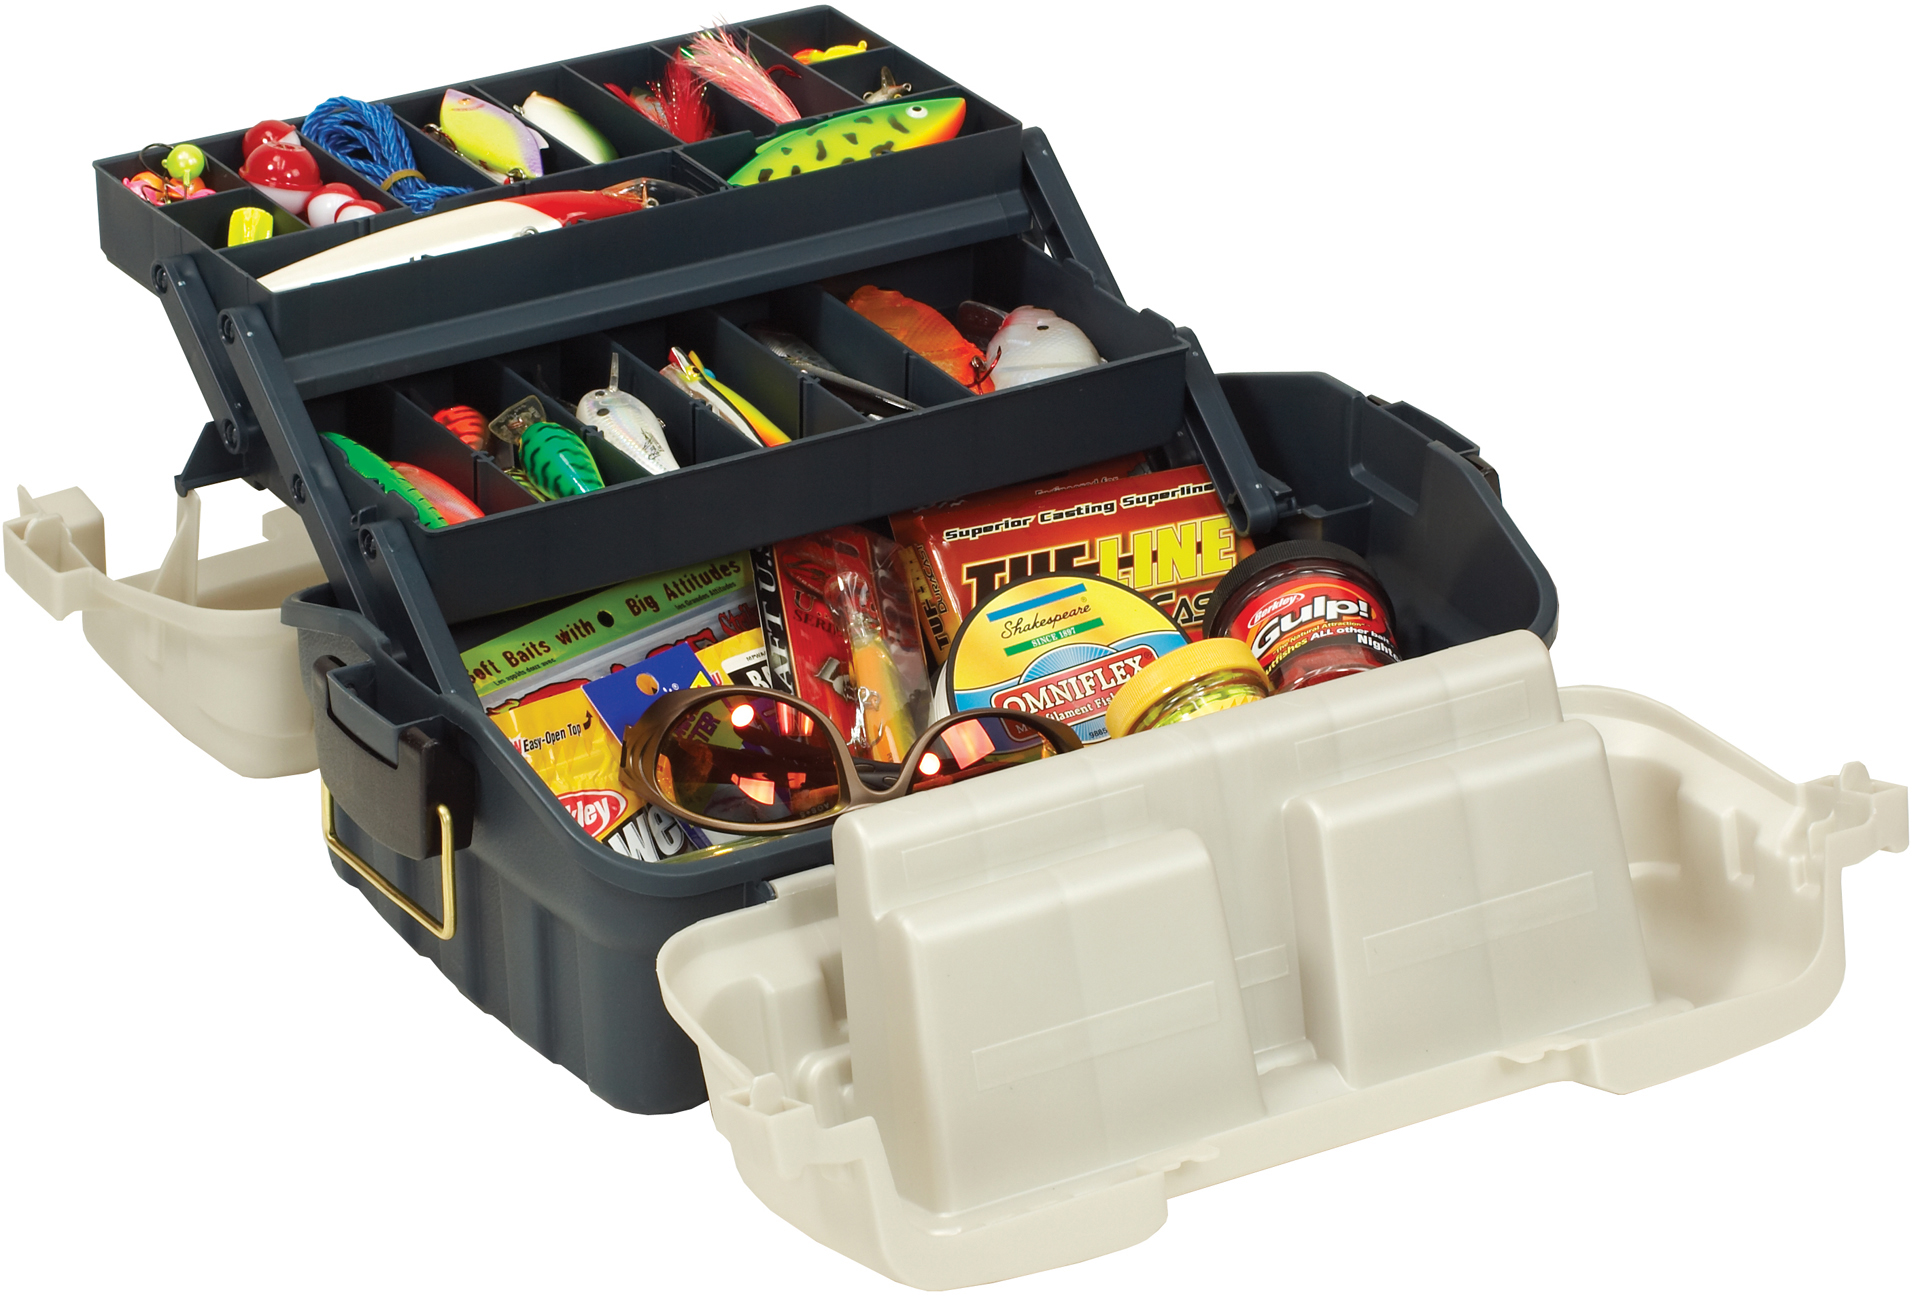 Shakespeare Blue Fishing Tackle Boxes